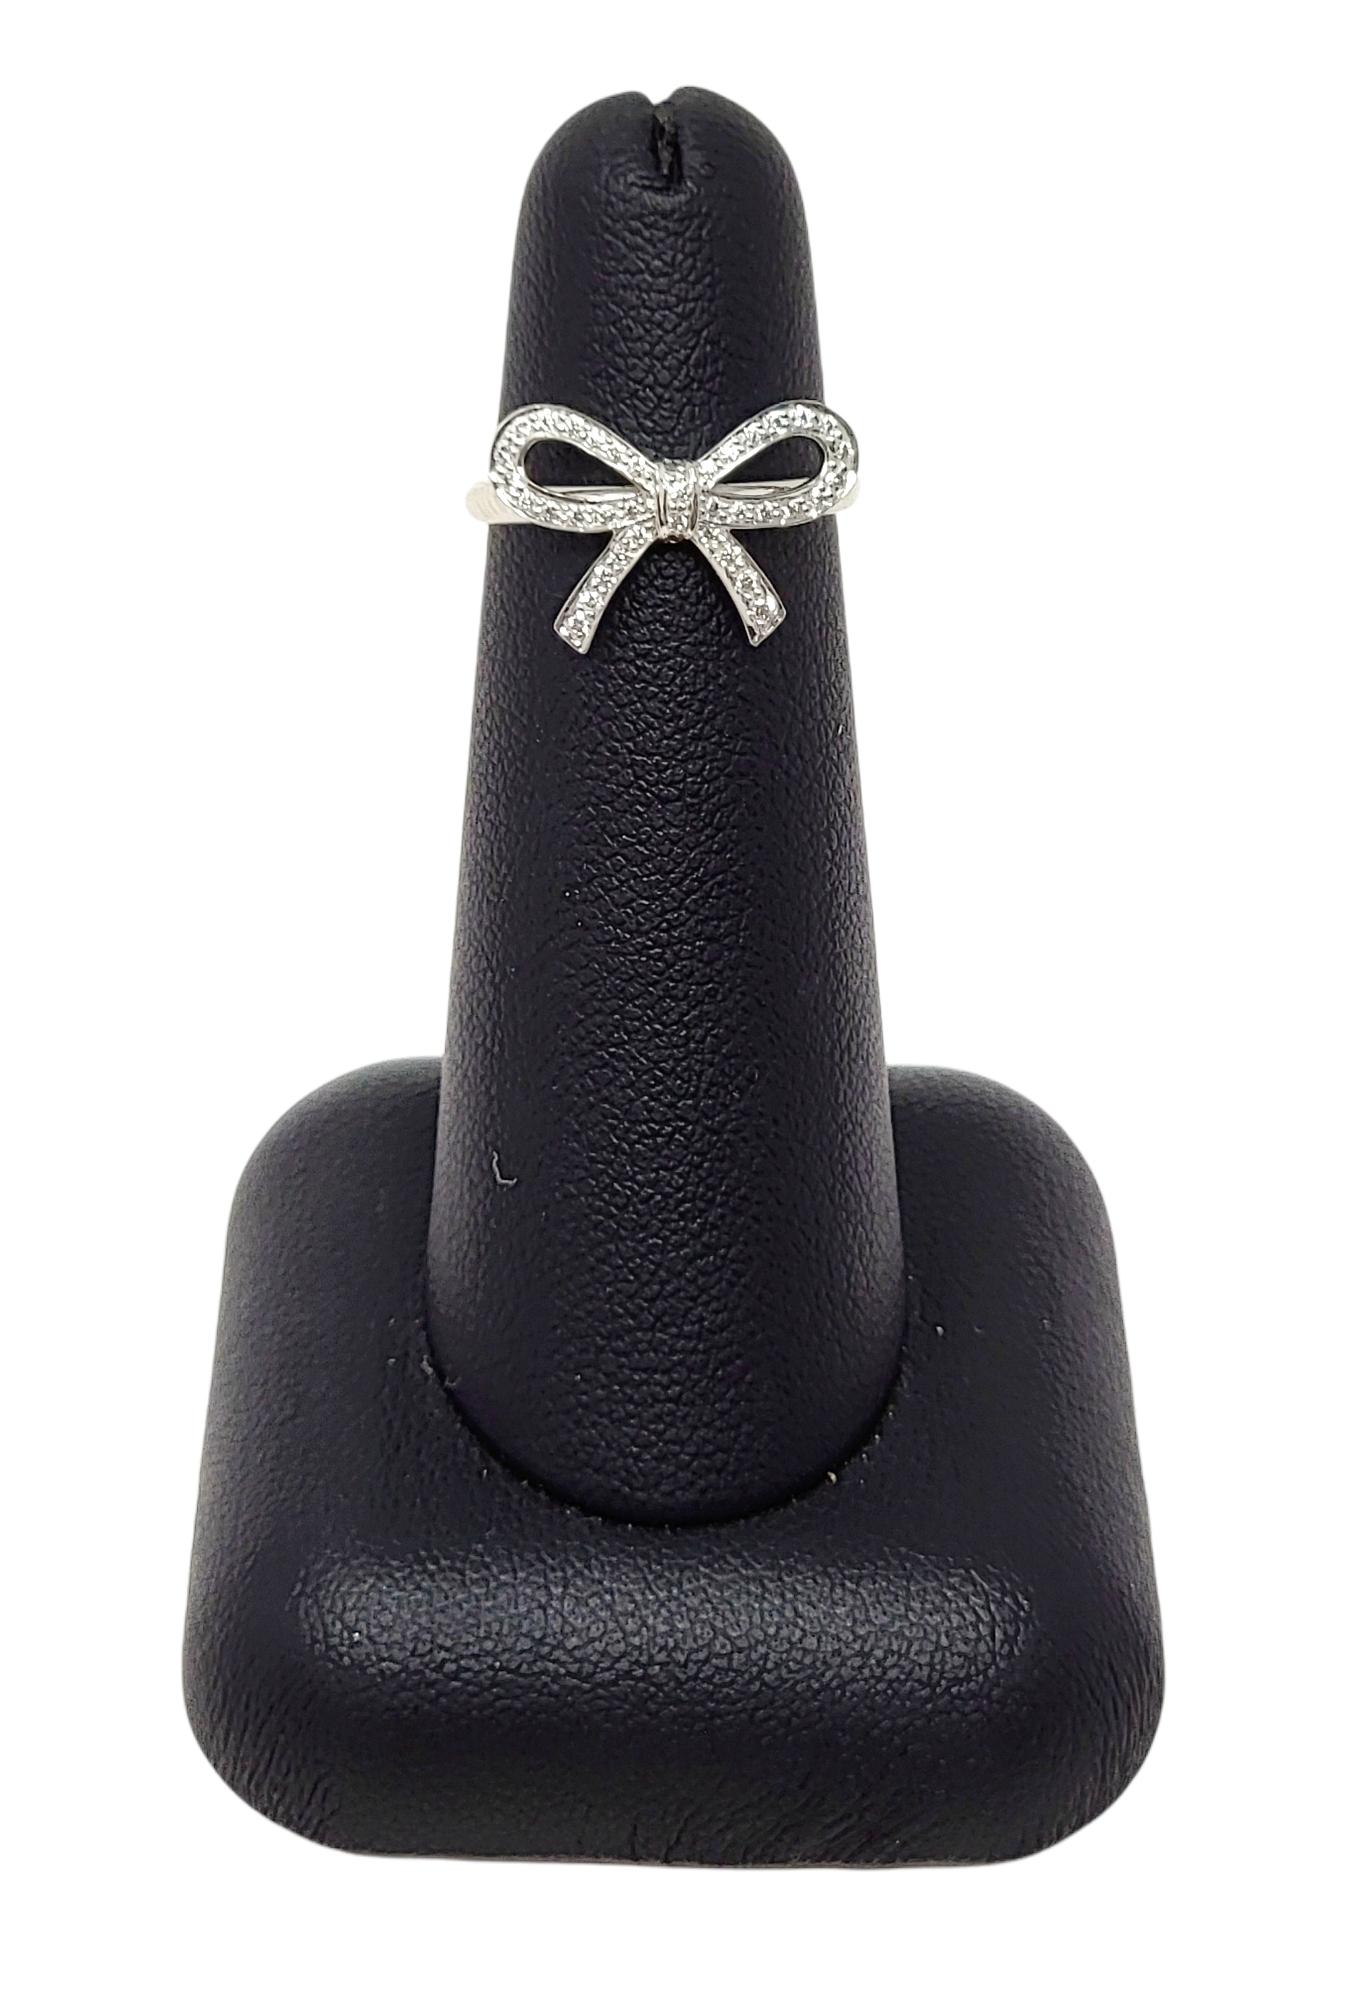 Tiffany & Co. Round Brilliant Pave Diamond Bow Band Ring in Platinum For Sale 3